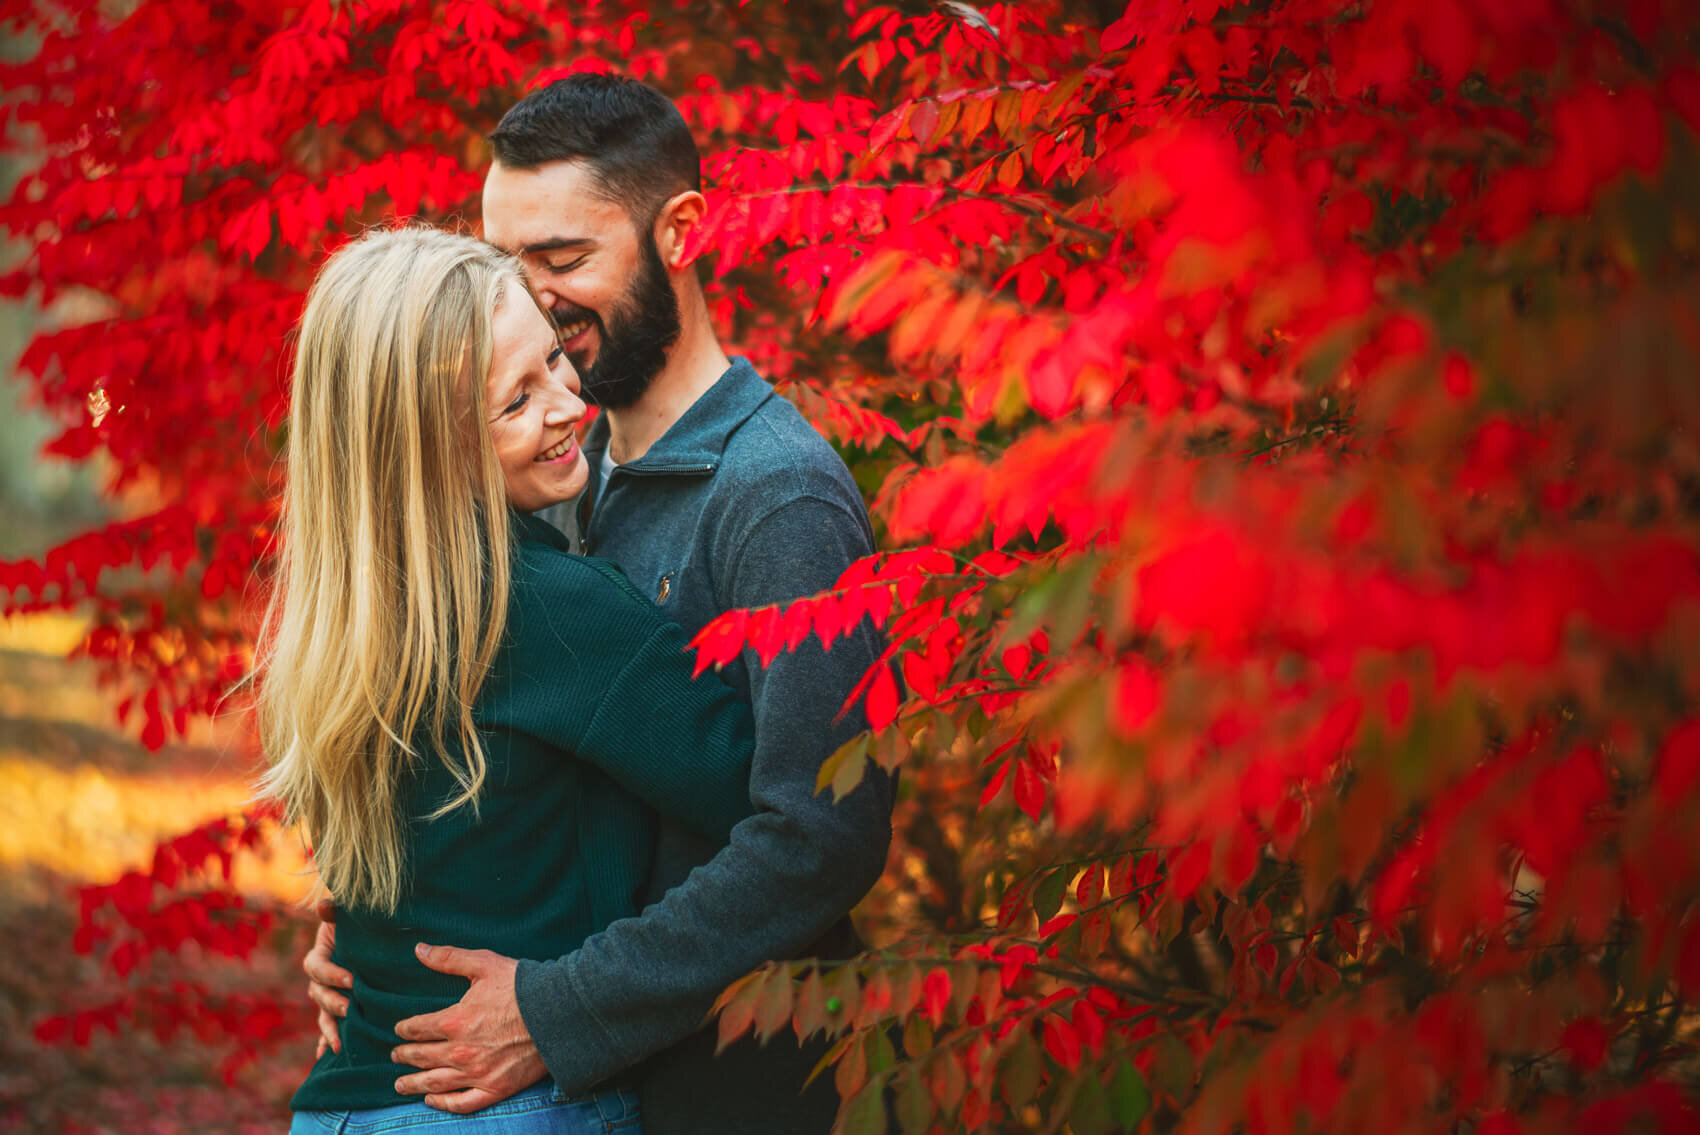  Some of my favorite images from this Highland, Illinois engagement session at Silver Lake Park. 